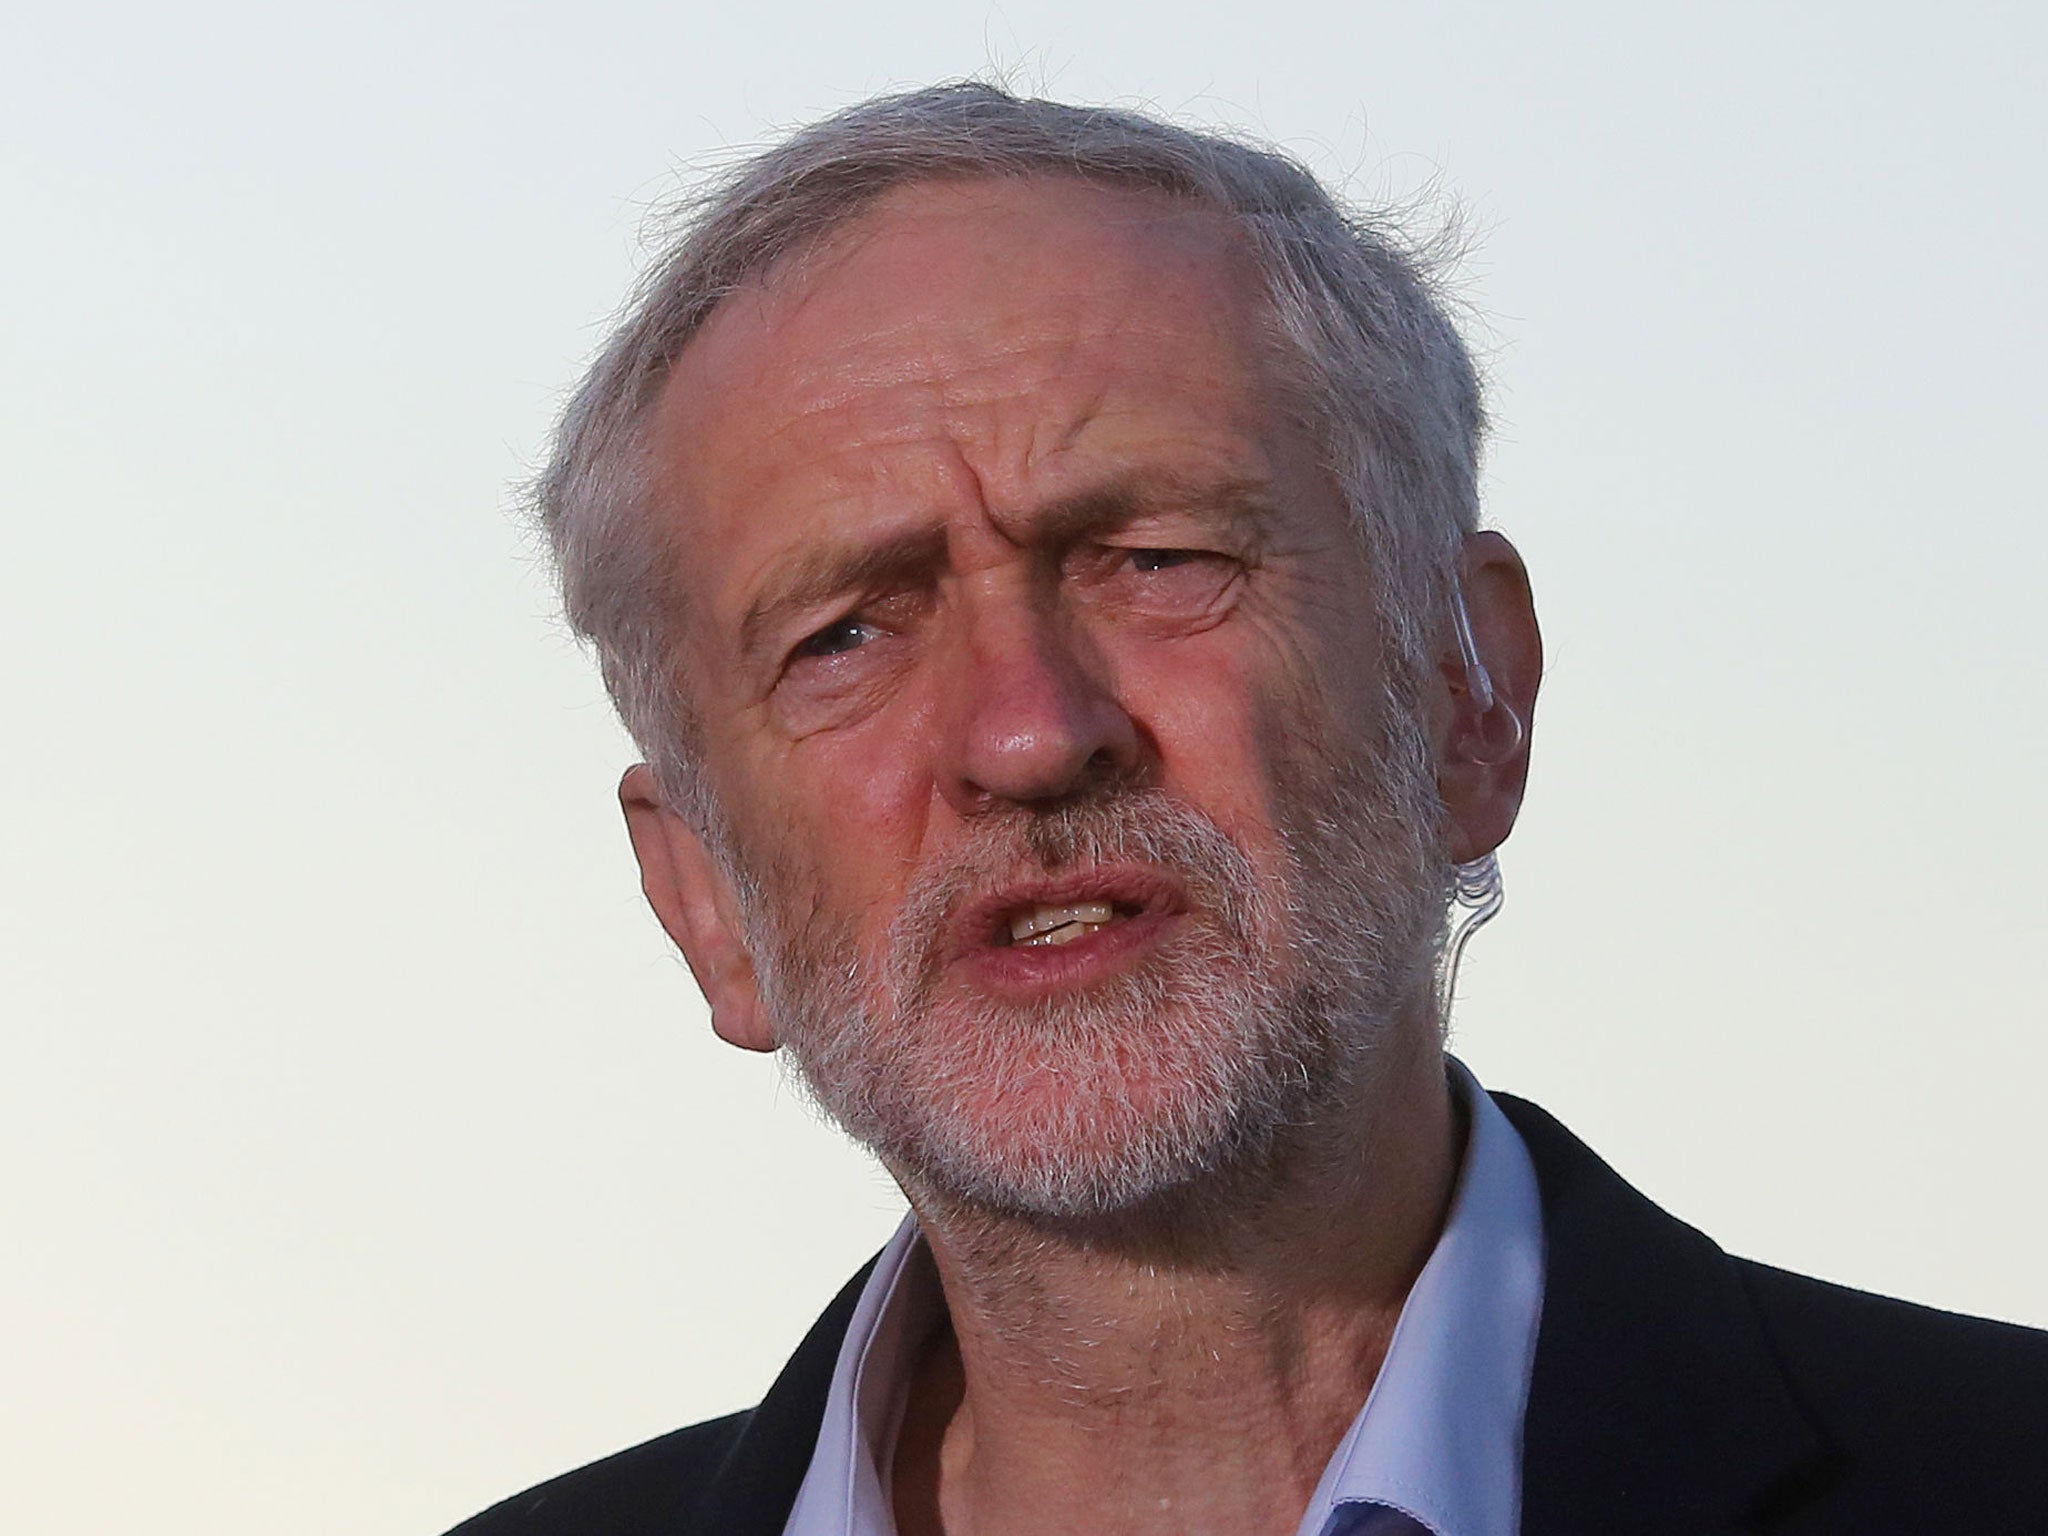 Jeremy Corbyn's leadership campaign drew on thousands of volunteers and activists